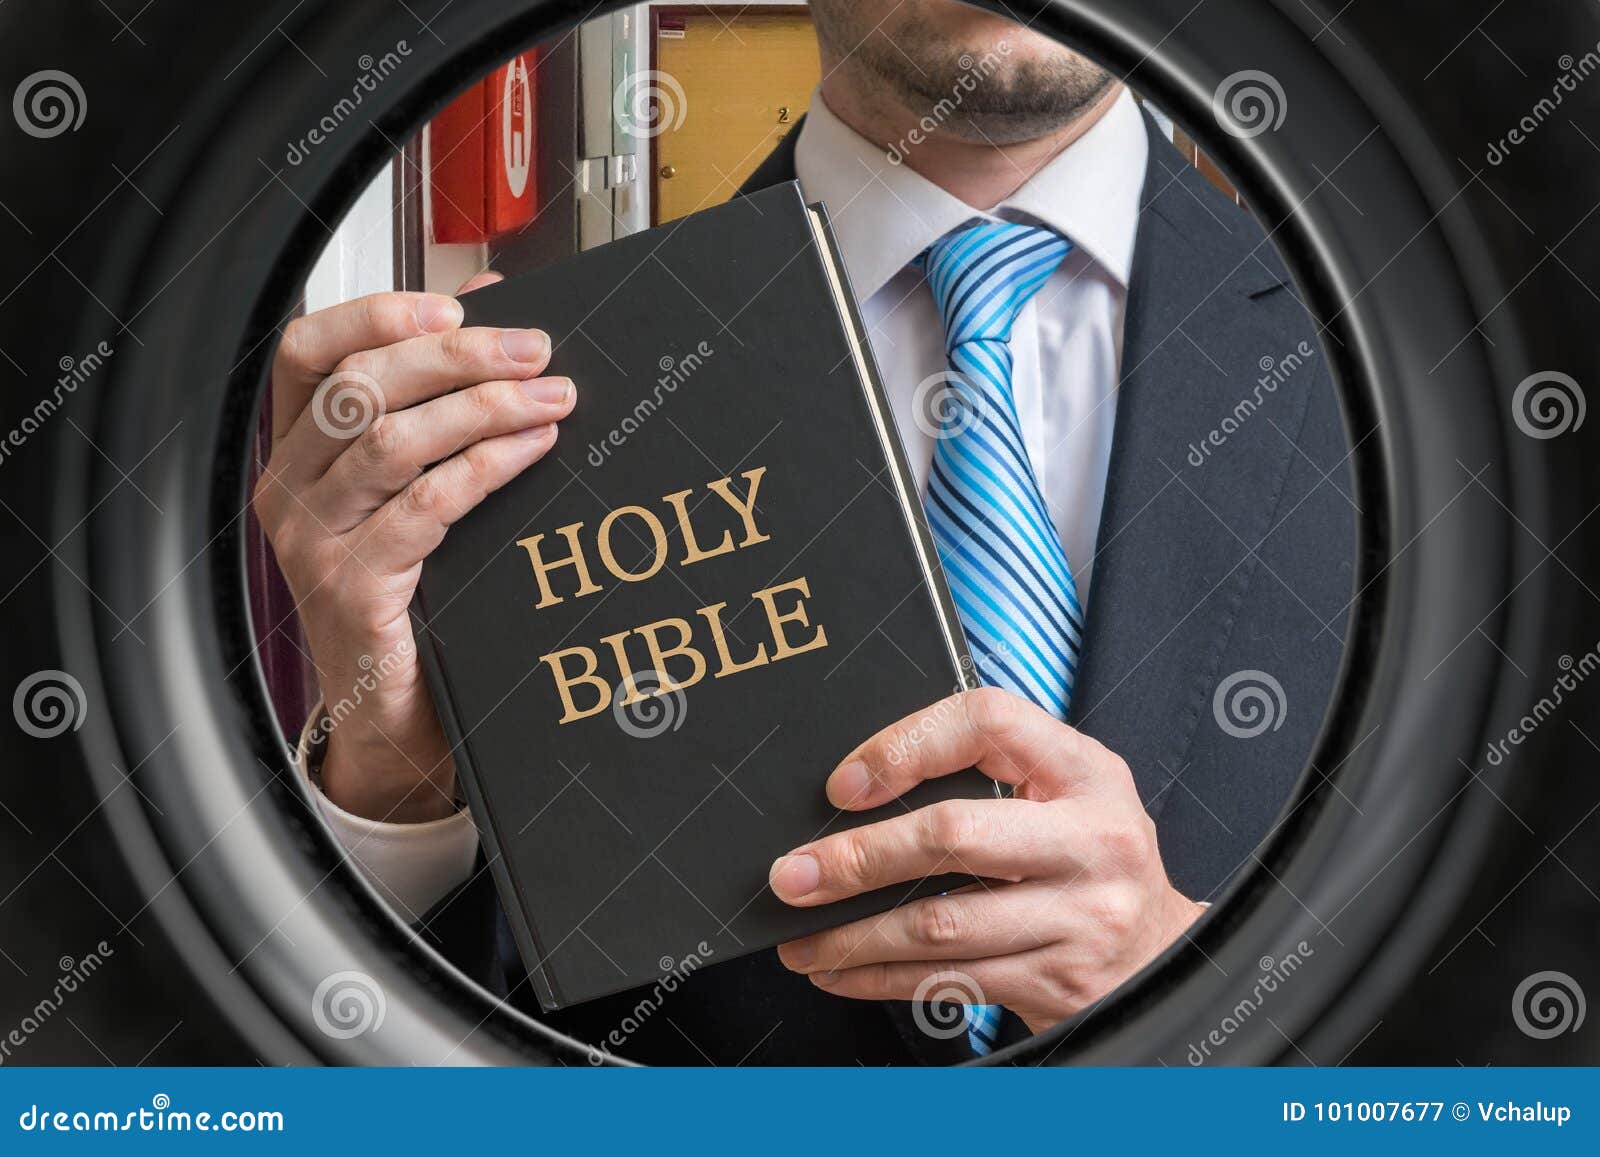 jehovah witness is showing bible behind door. view from peephole